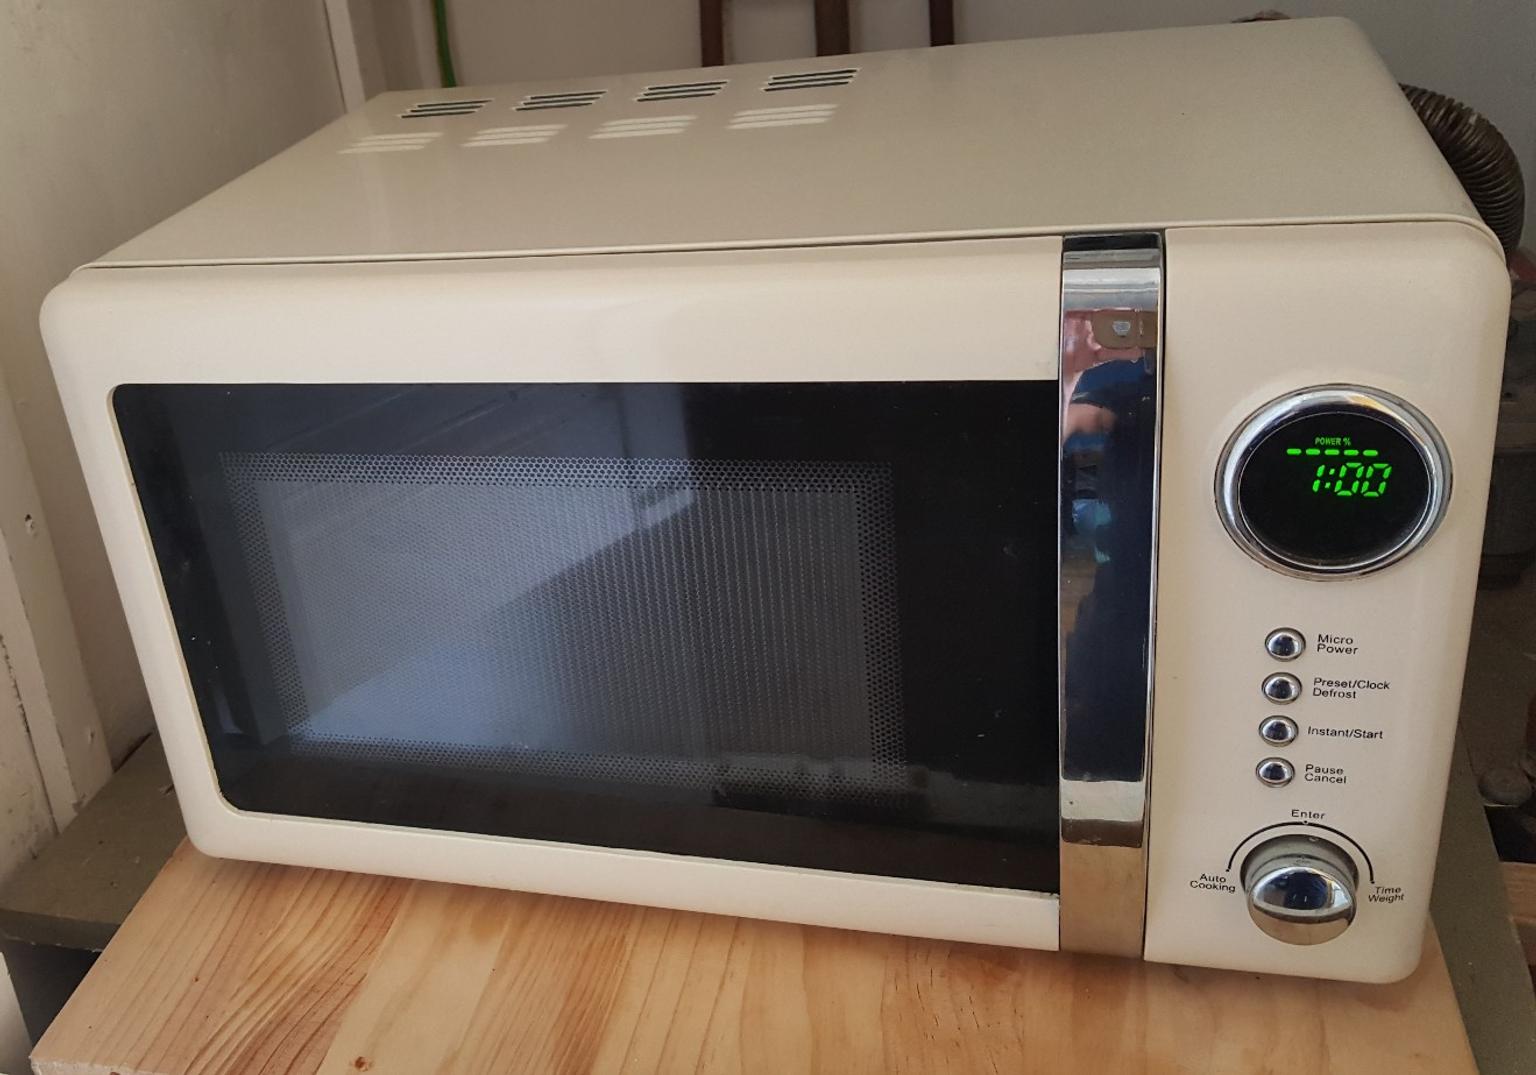 Wilko Microwave Cream 20L in SW2 Lambeth for £25.00 for sale | Shpock